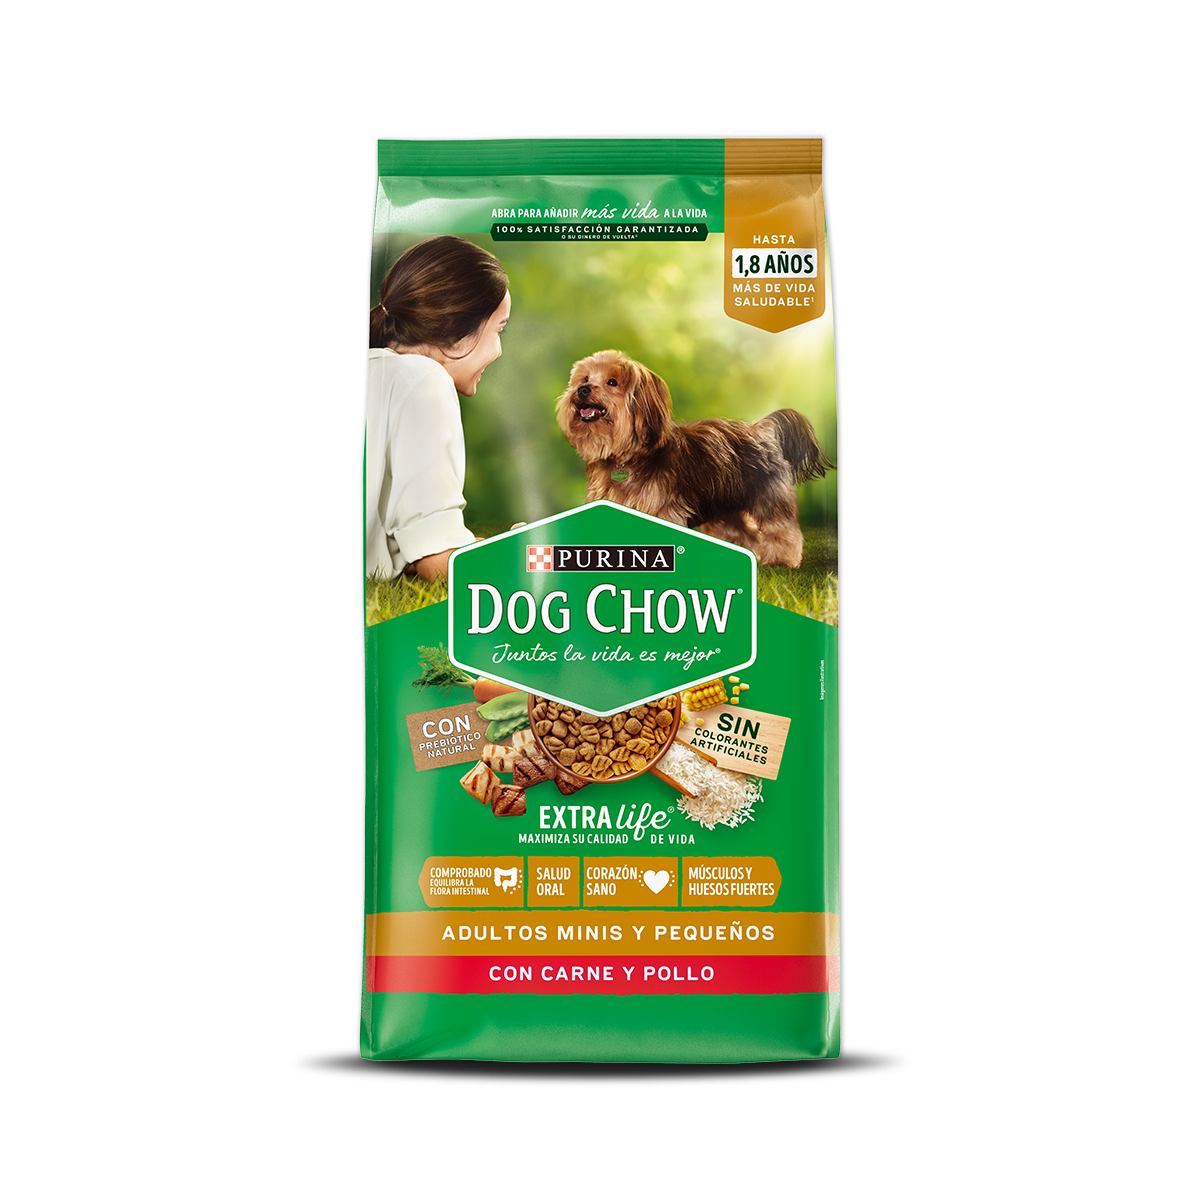 Purina-DogChow-adultos-minis-colombia.png